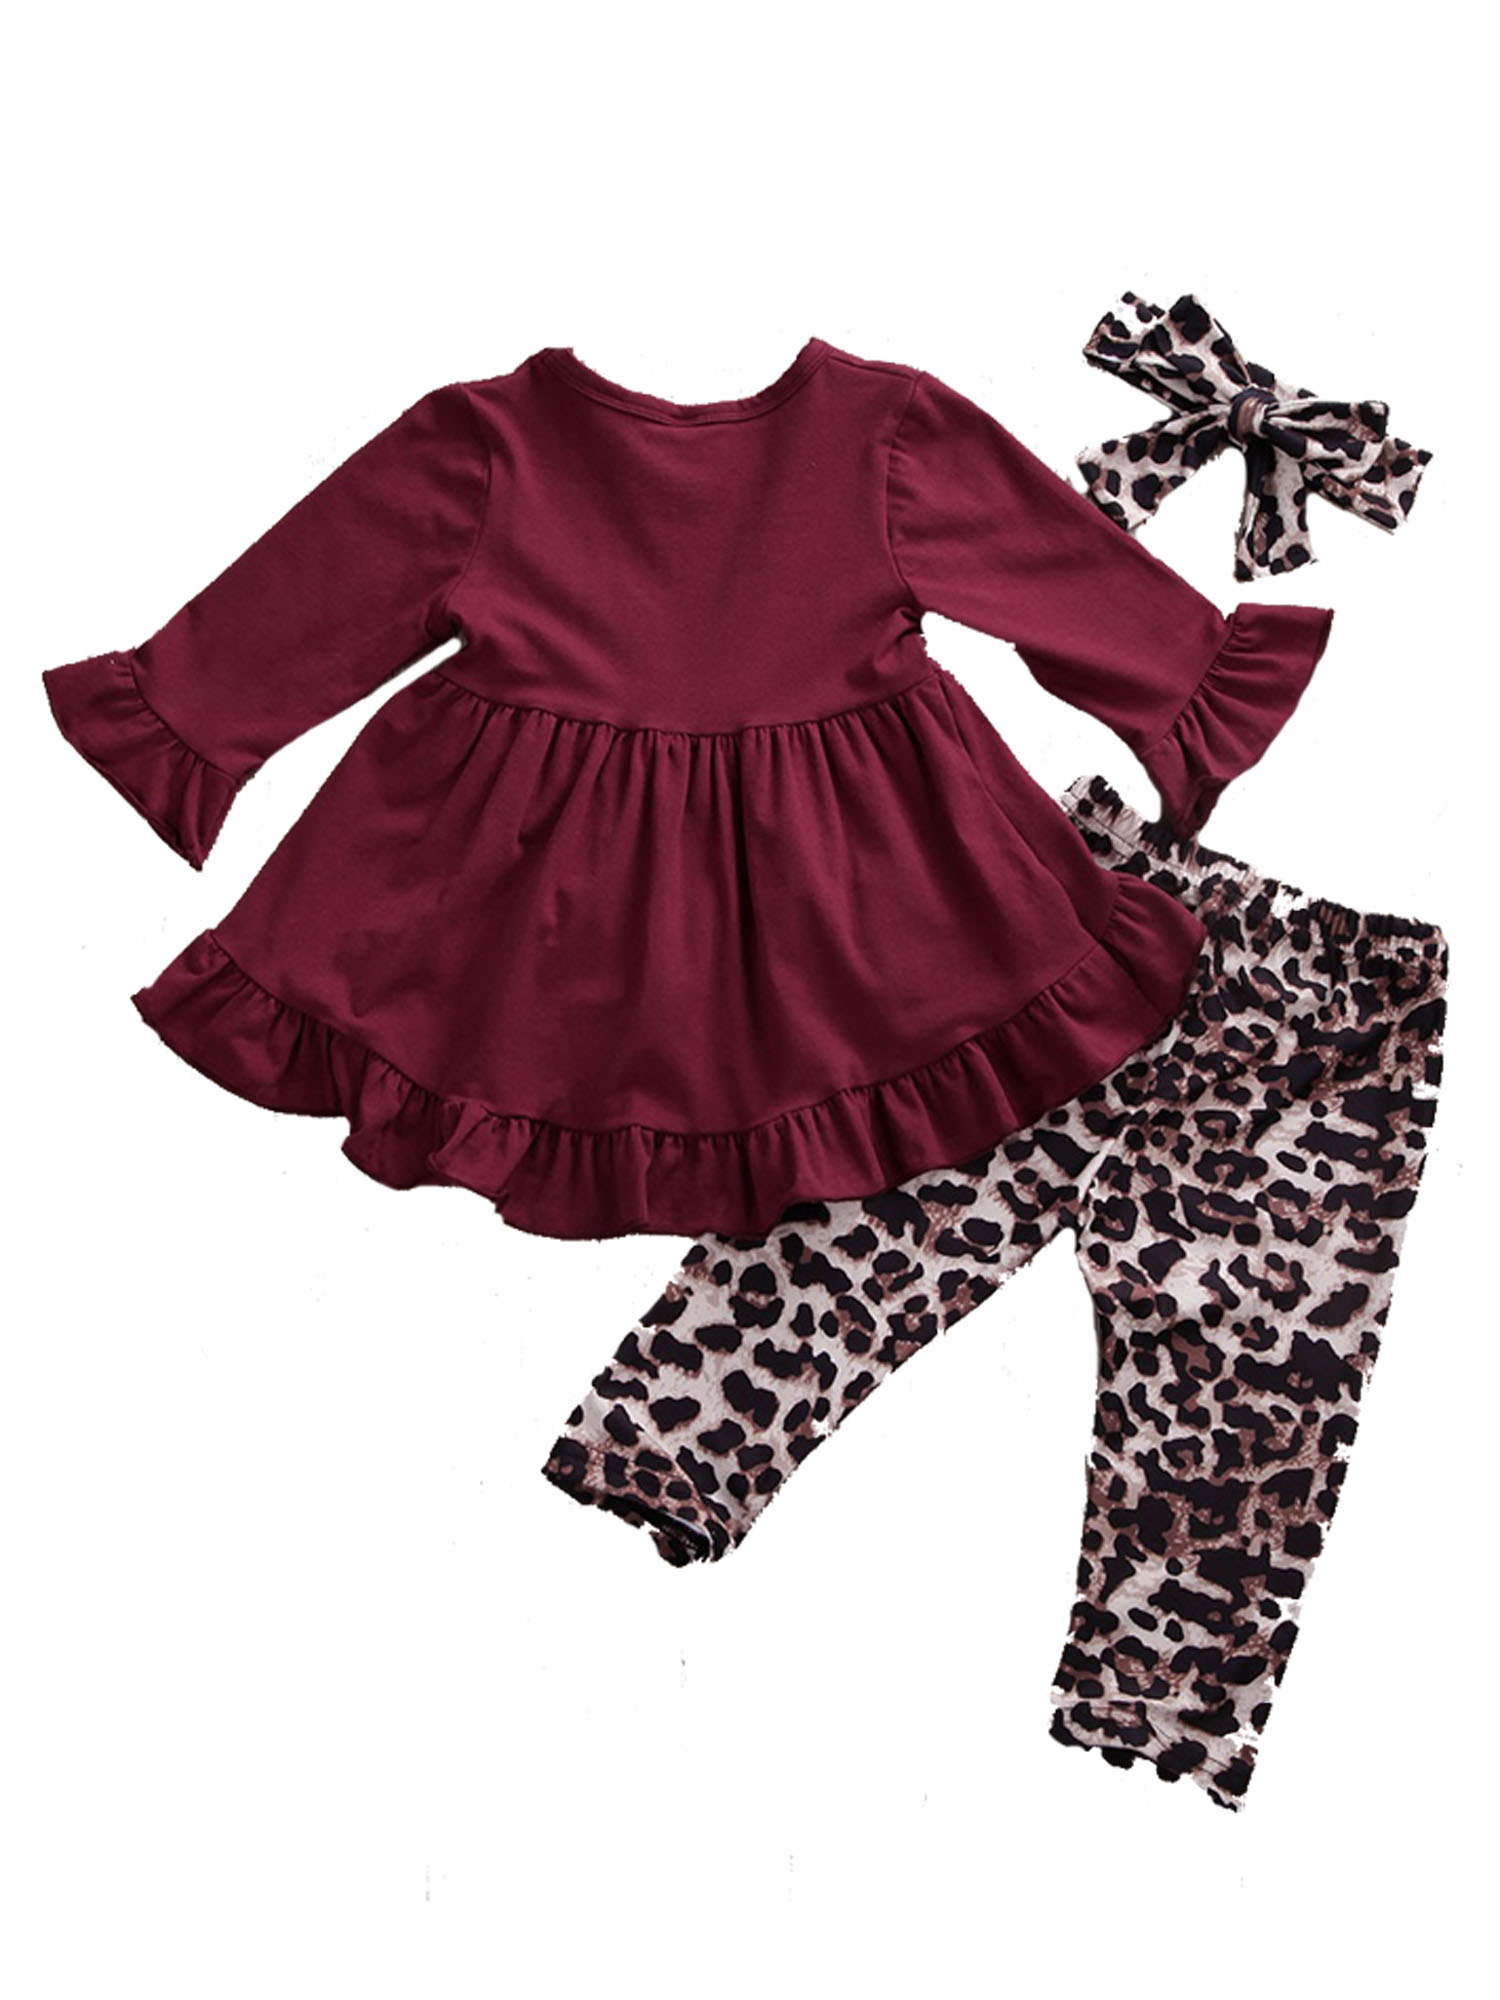 Dewadbow Boutique Kid Baby Girl Leopard Clothes Top T-shirt Dress Legging Pants Outfit - image 4 of 5